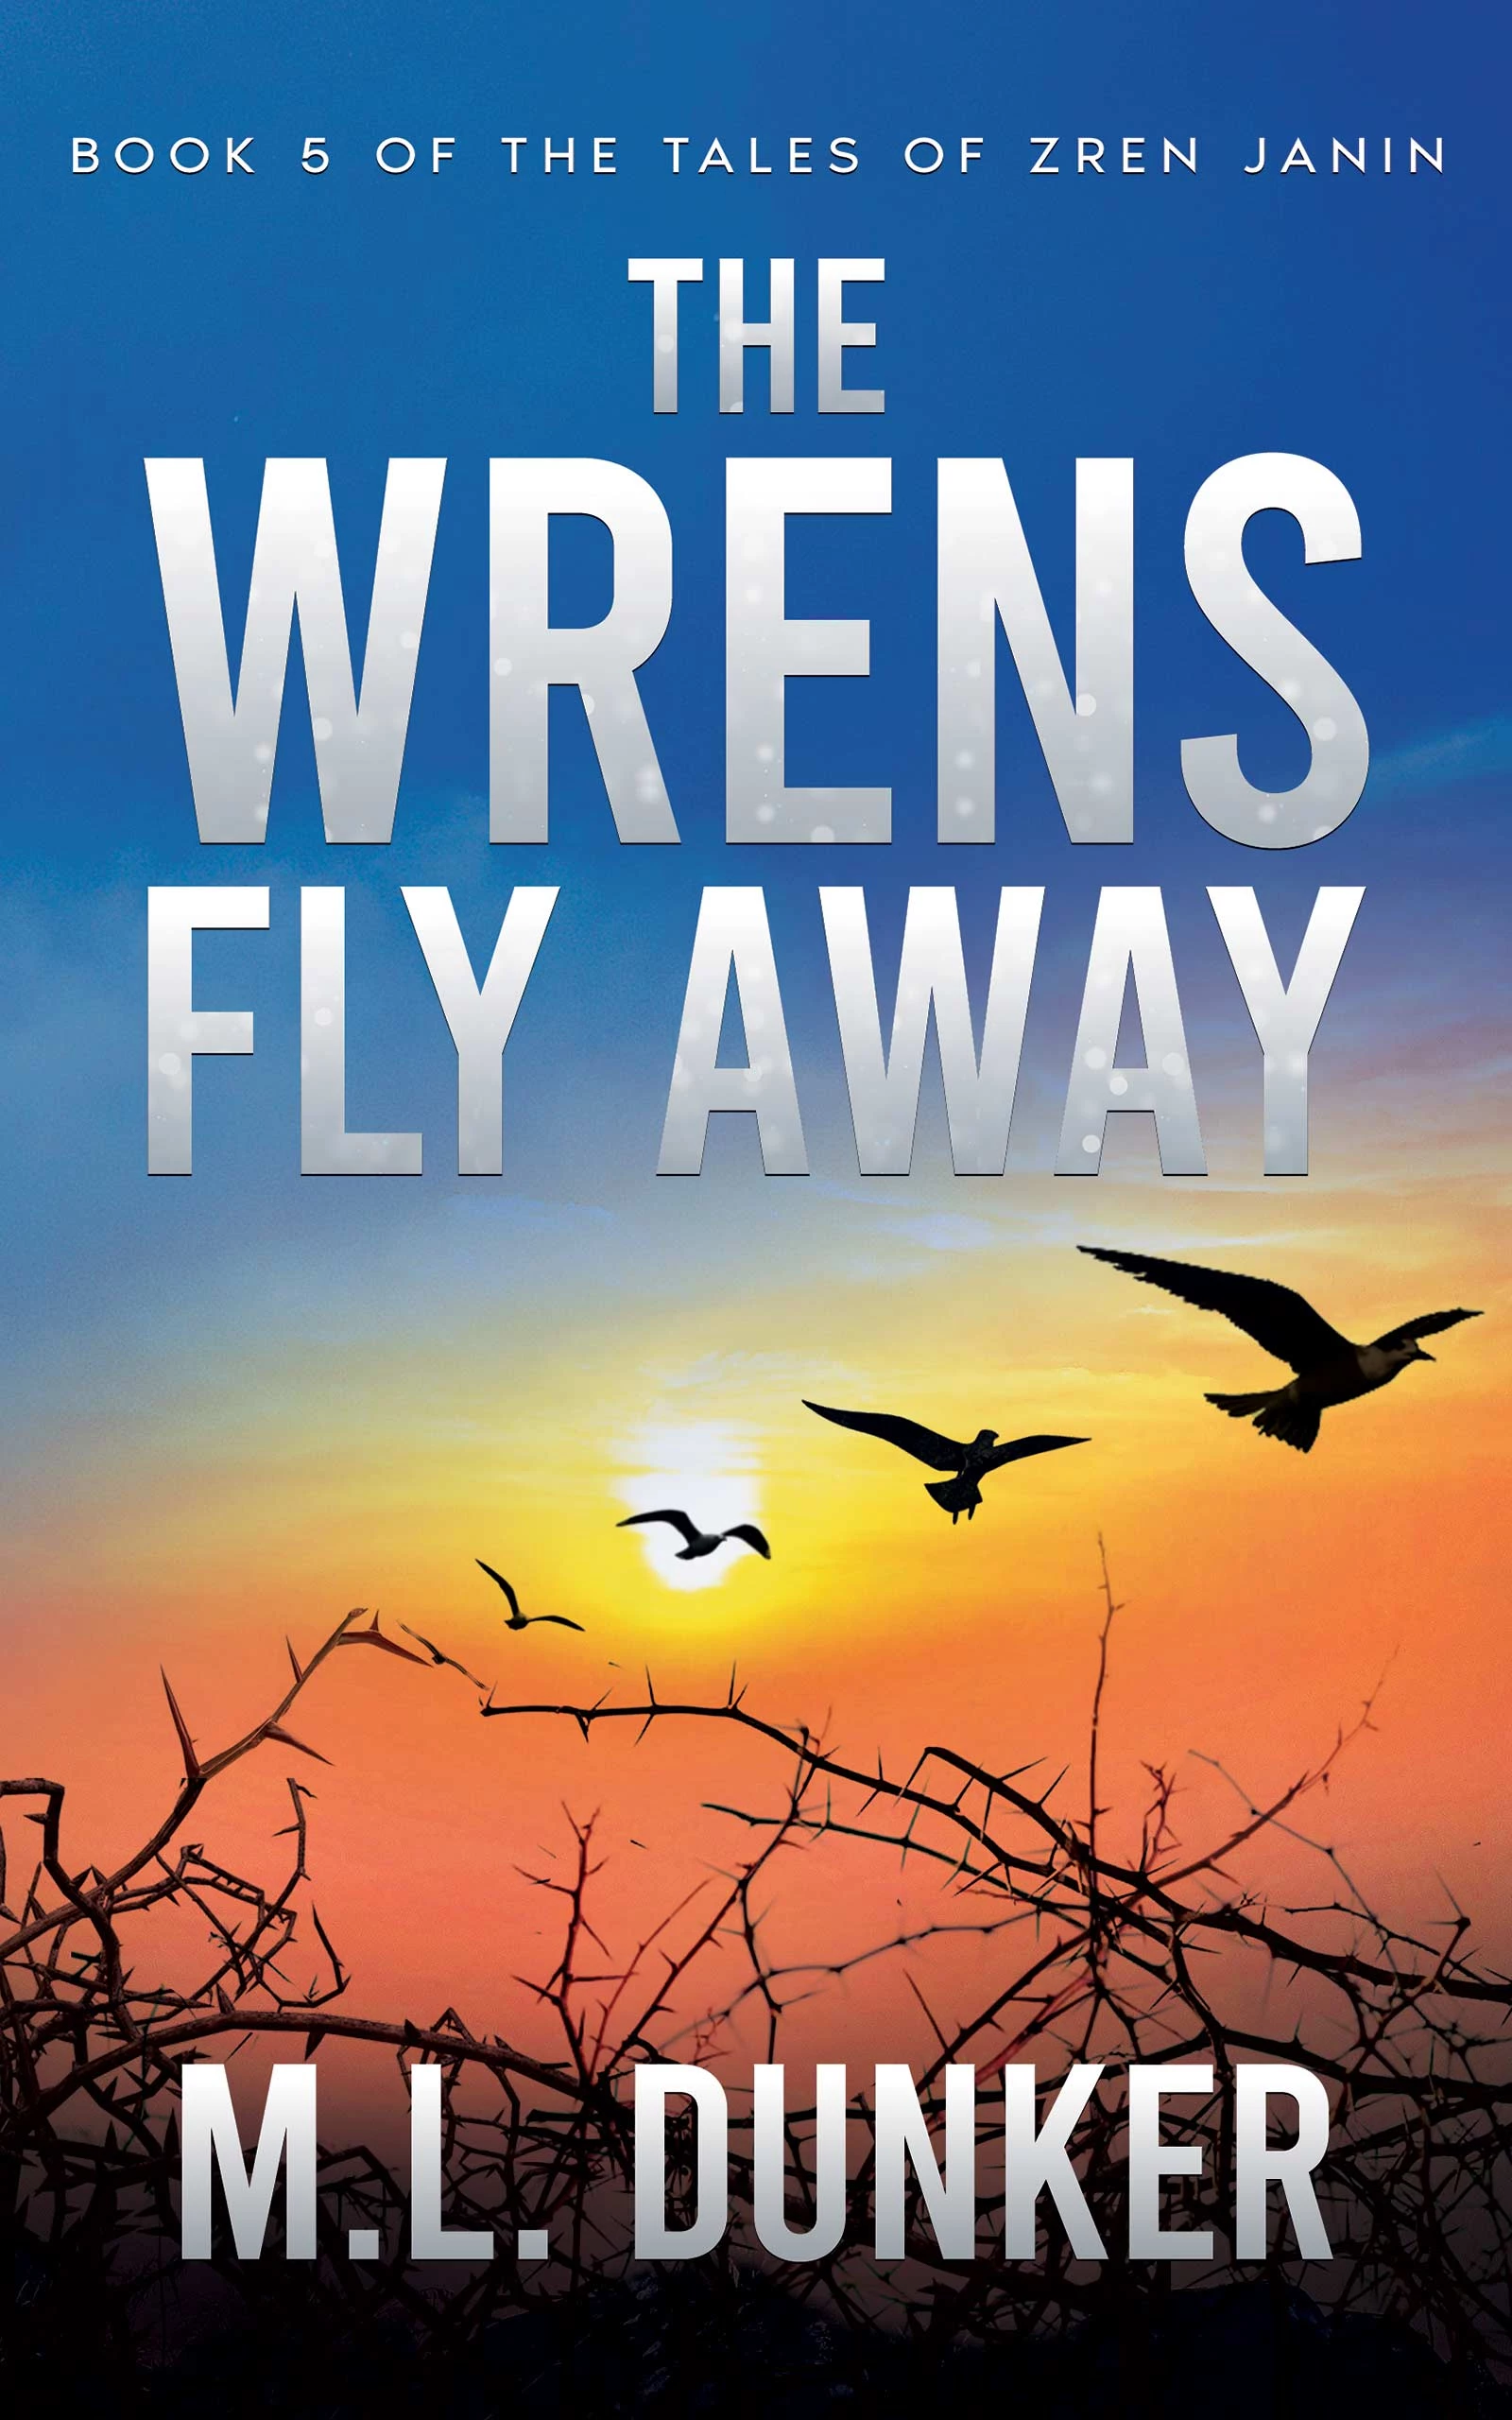 The Wrens Fly Away: Book 5 of The Tales of Zren Janin